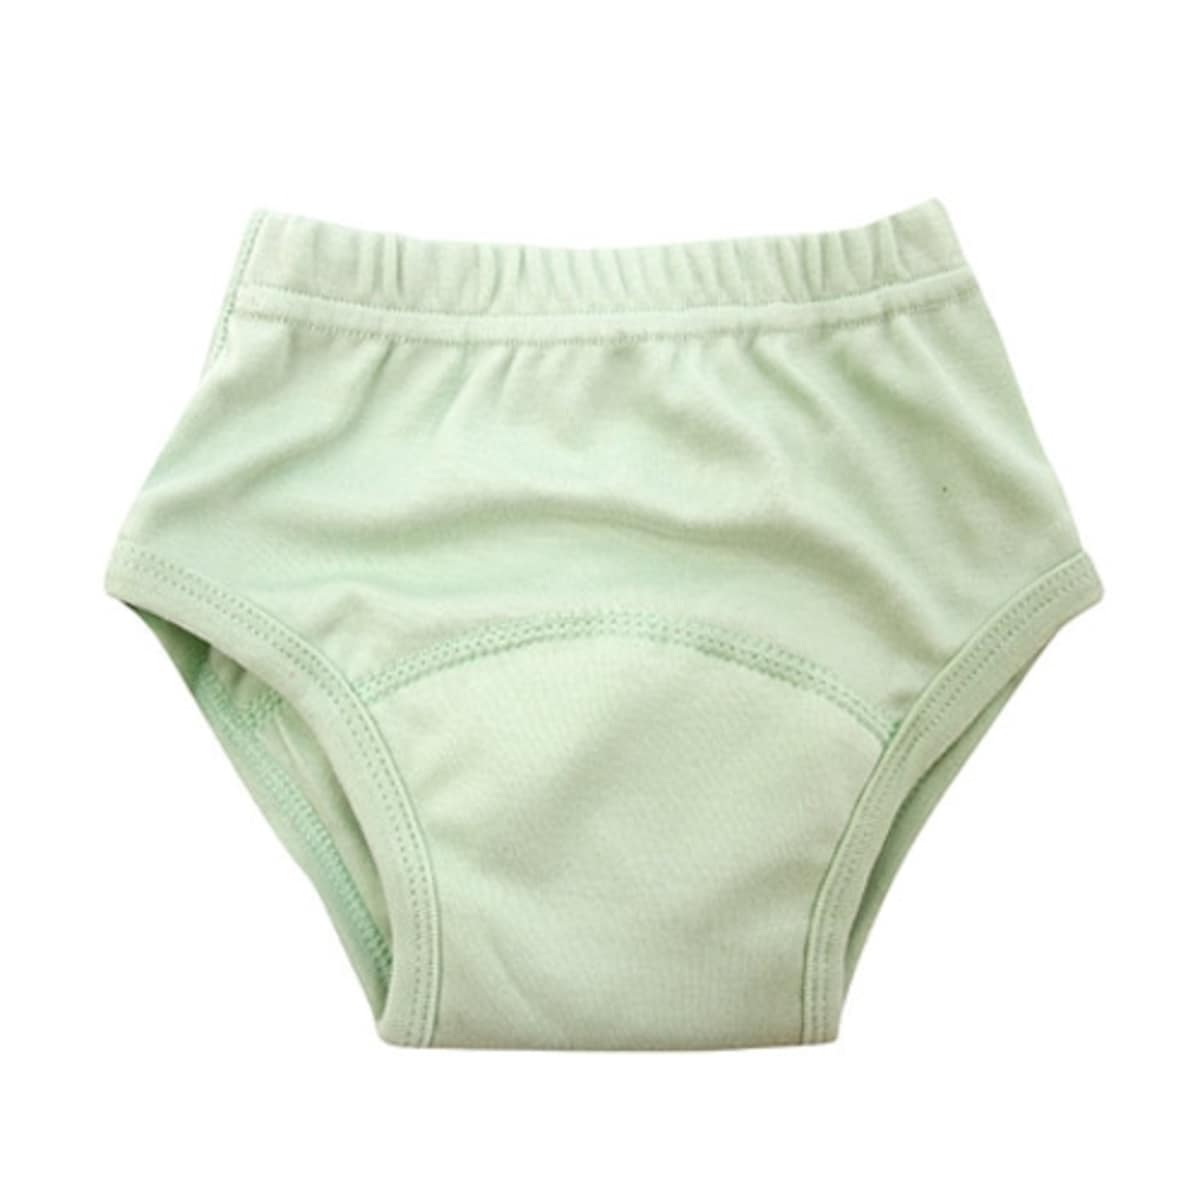 Pea Pods Training Pants Green Small